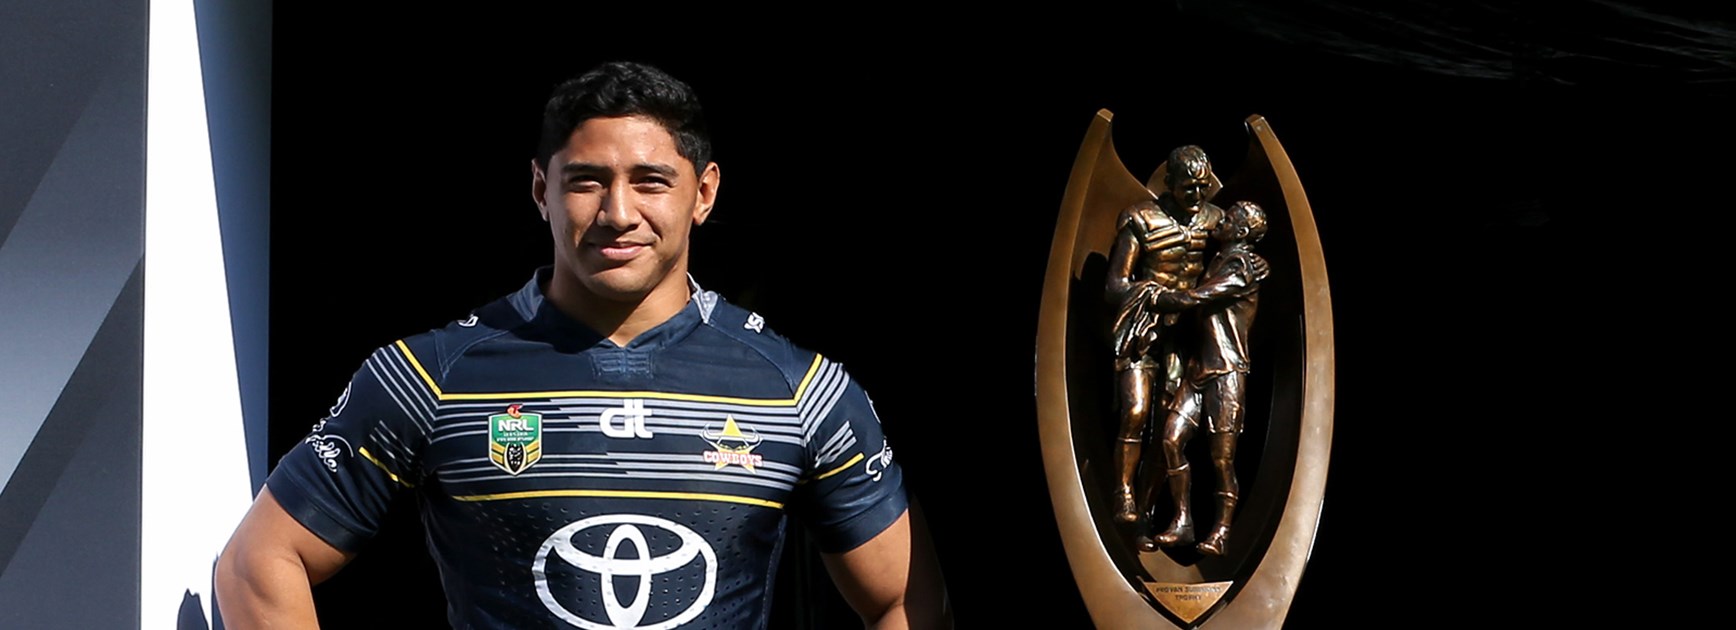 North Queensland's Jason Taumalolo and the NRL Telstra Premiership trophy.